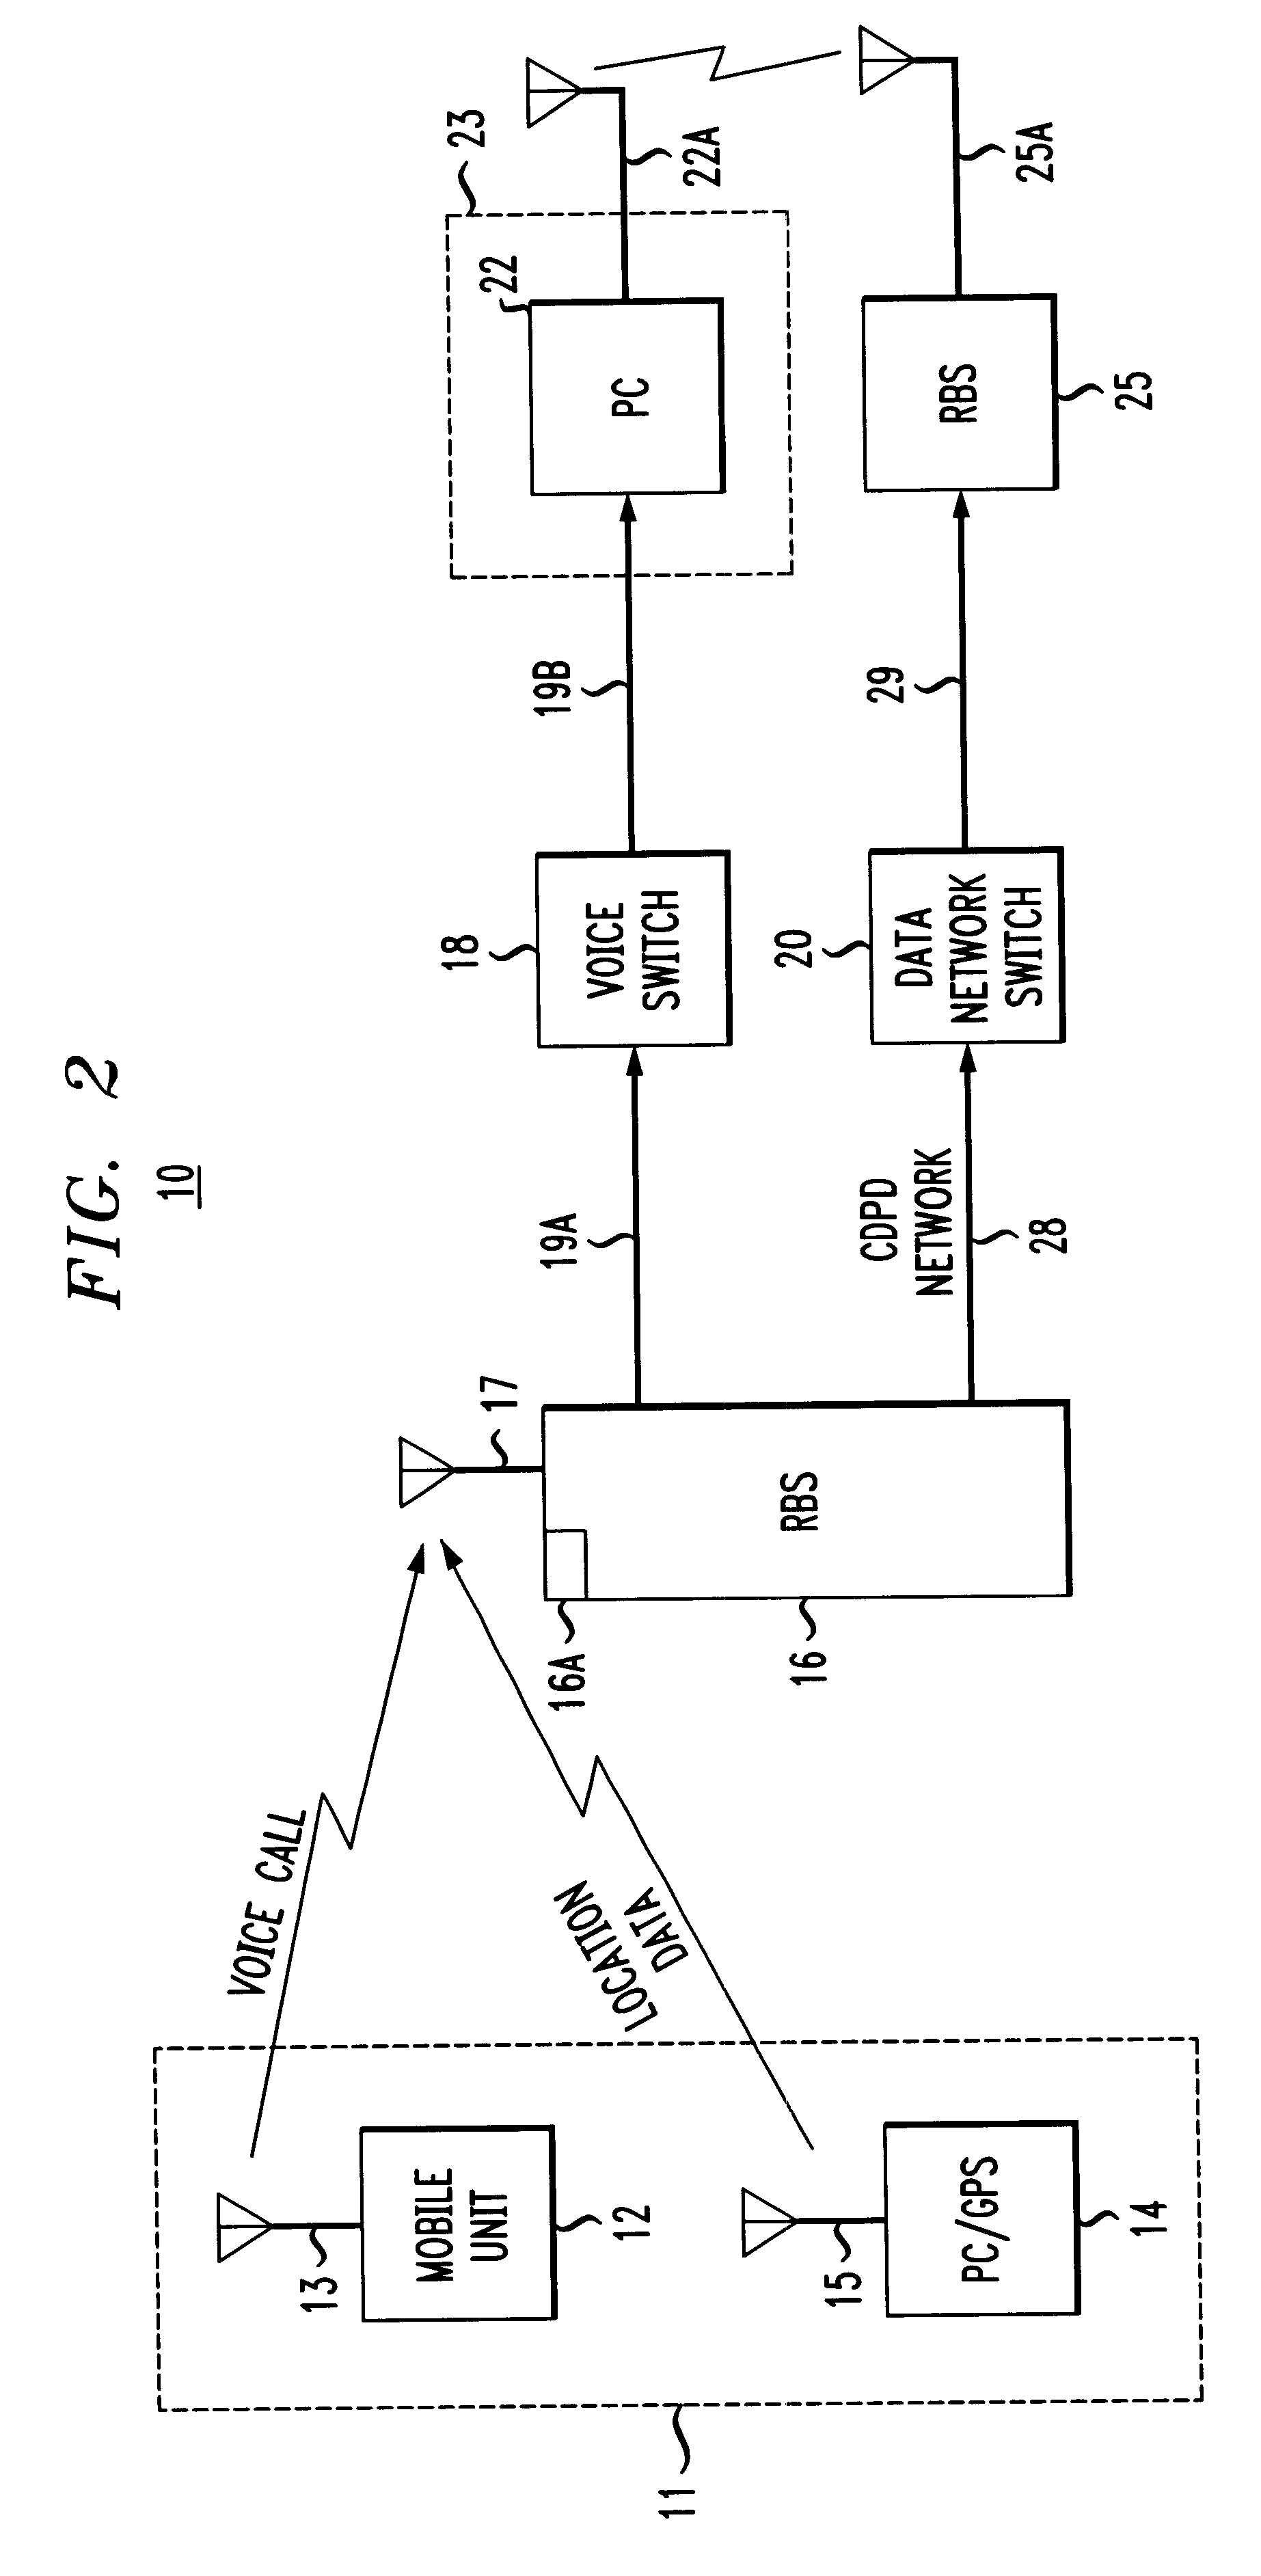 Method and system for optimizing performance of a mobile communication system